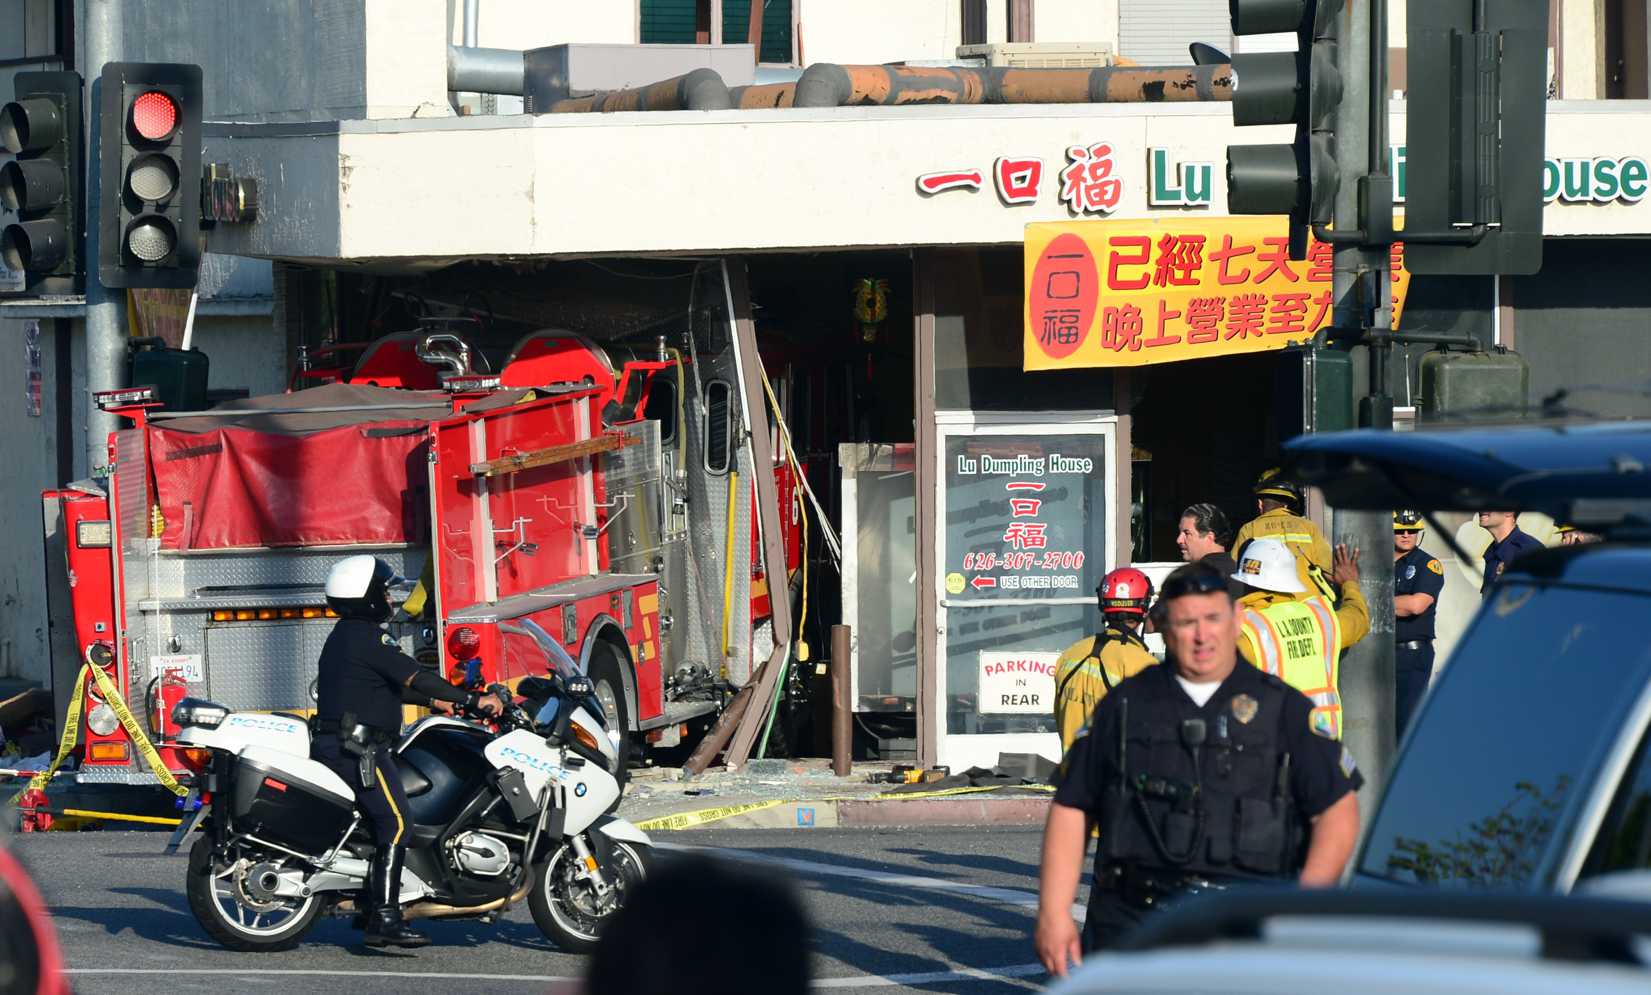 A motorcycle policeman arrives on the scene in Monterey Park, California on April 16, 2014, where two fire engines - one from the Monterey Park Fire department, another from the Alhambra Fire Department - chasing a fire crashed into each other with one barreling into a business, the Lu Dumpling House, leaving fifteen people injured. (Frederic J. Brown—AFP / Getty Images)